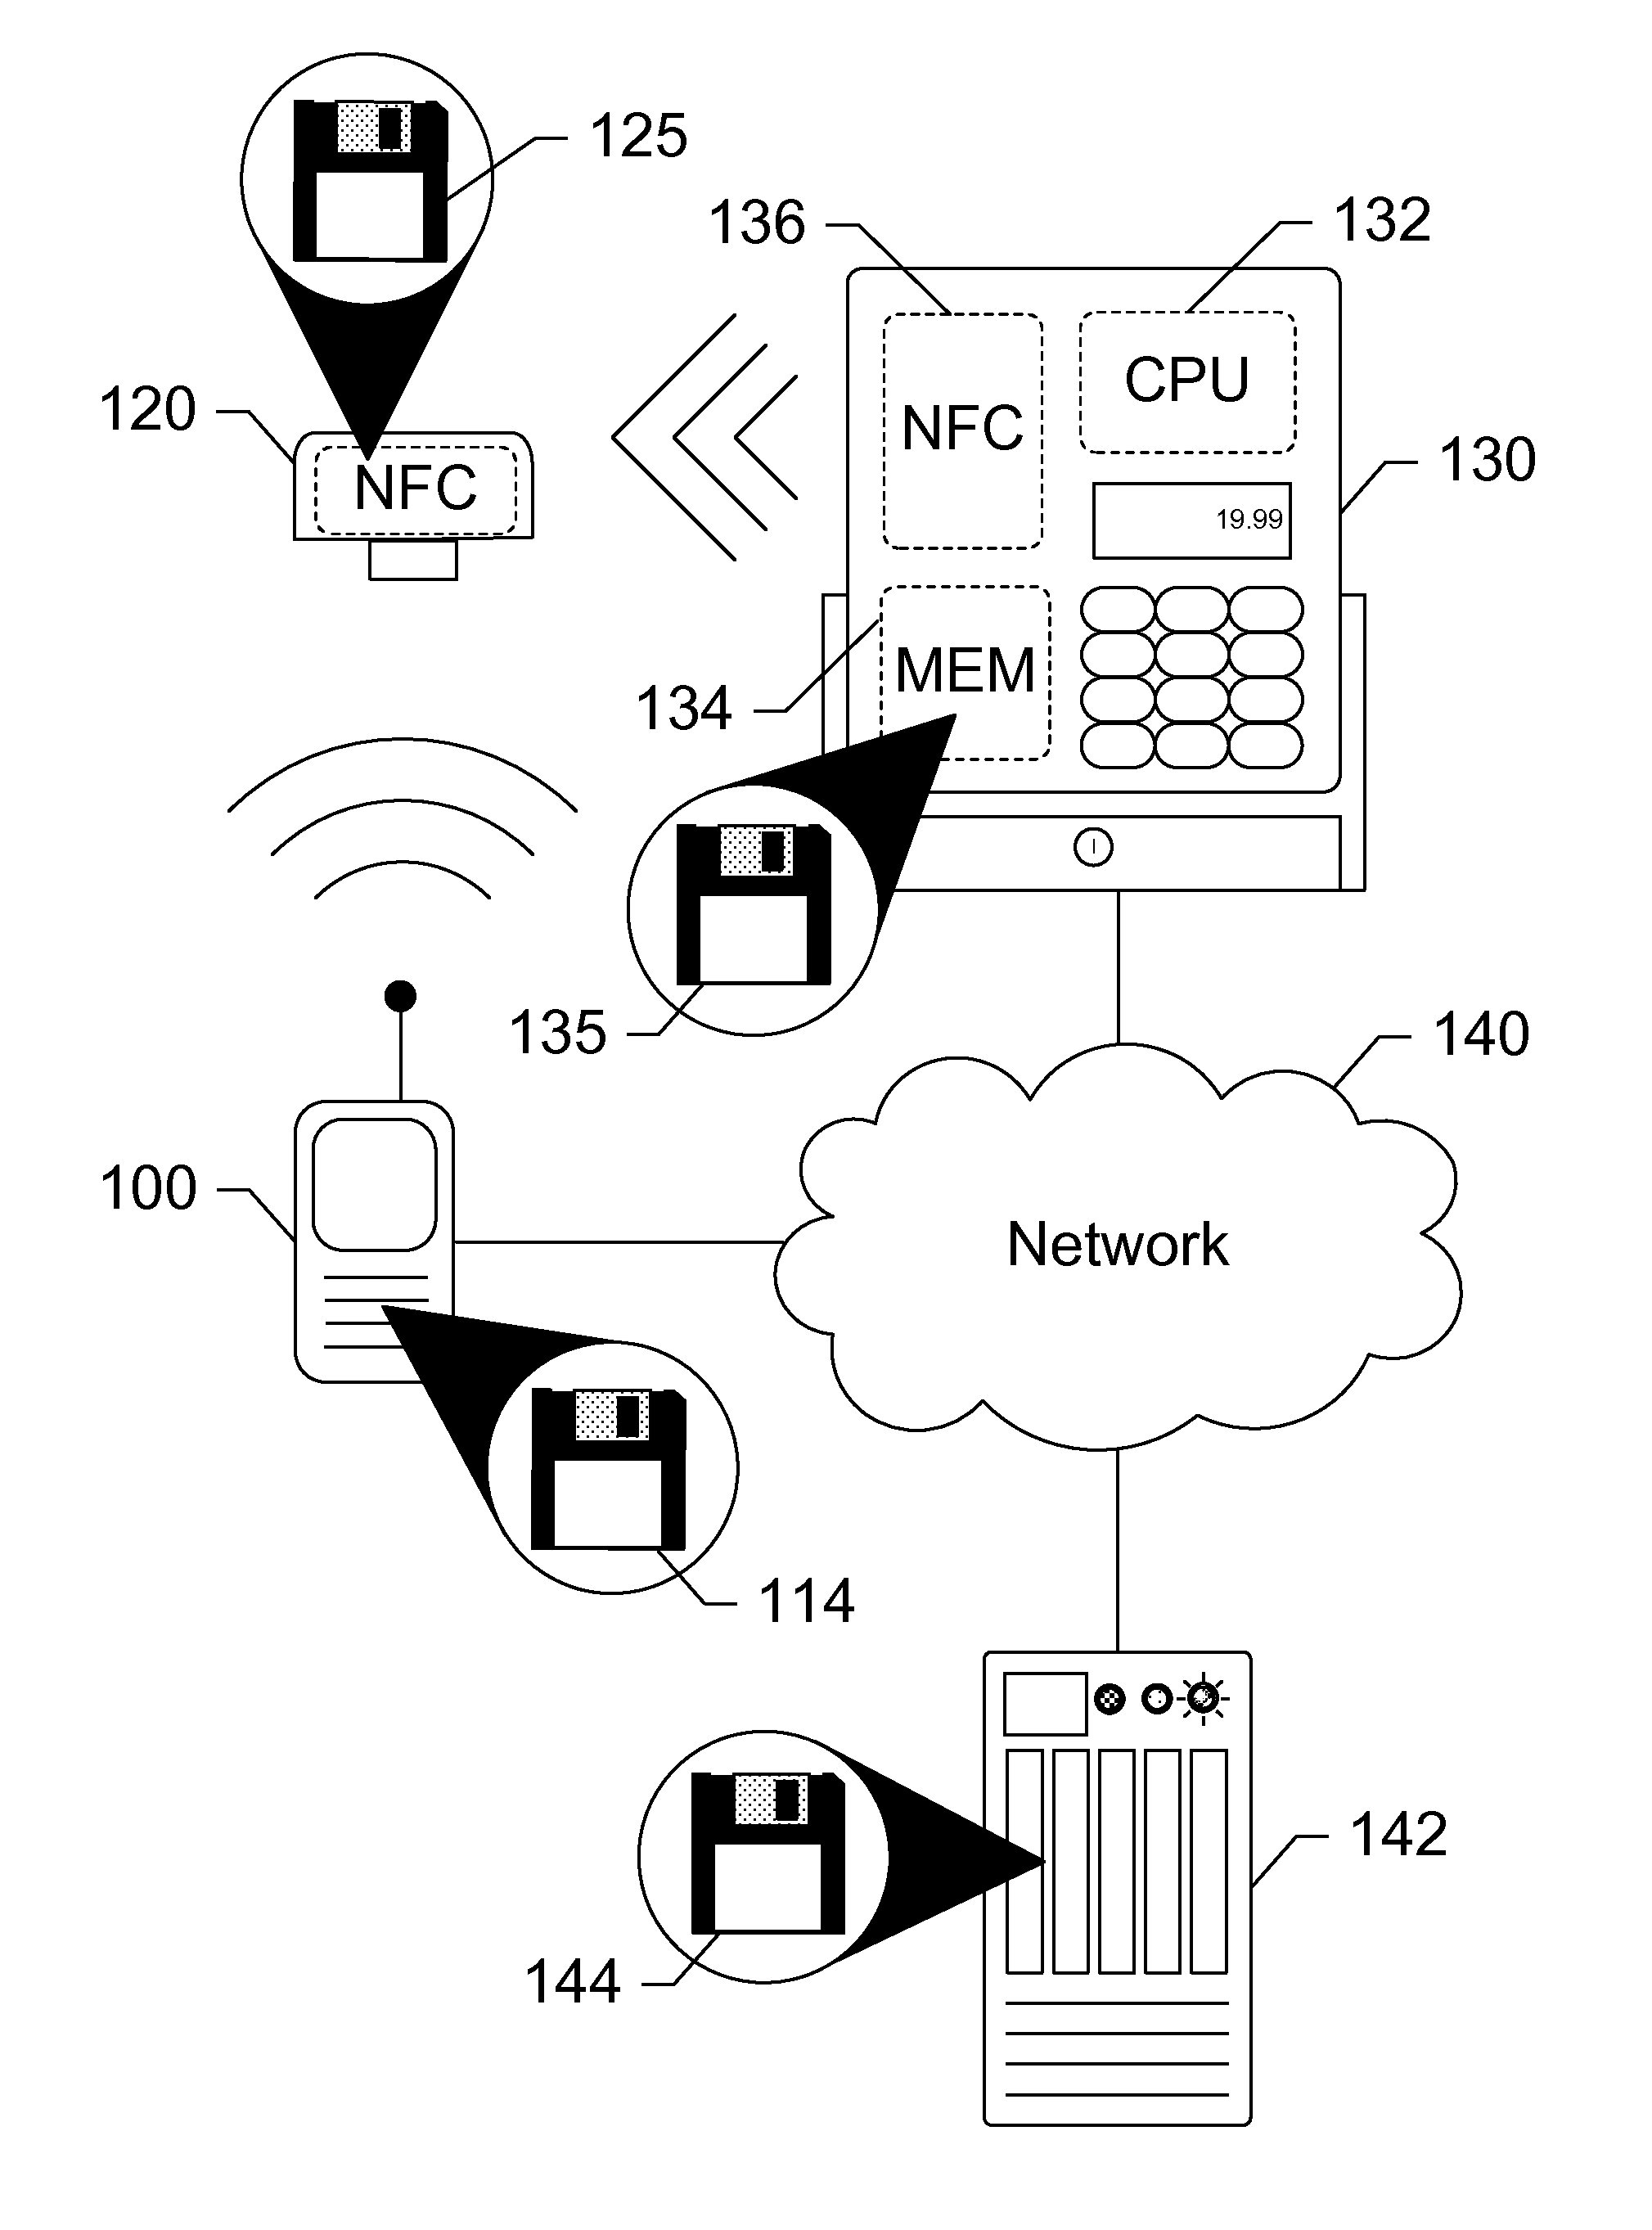 Security Token for Mobile Near Field Communication Transactions